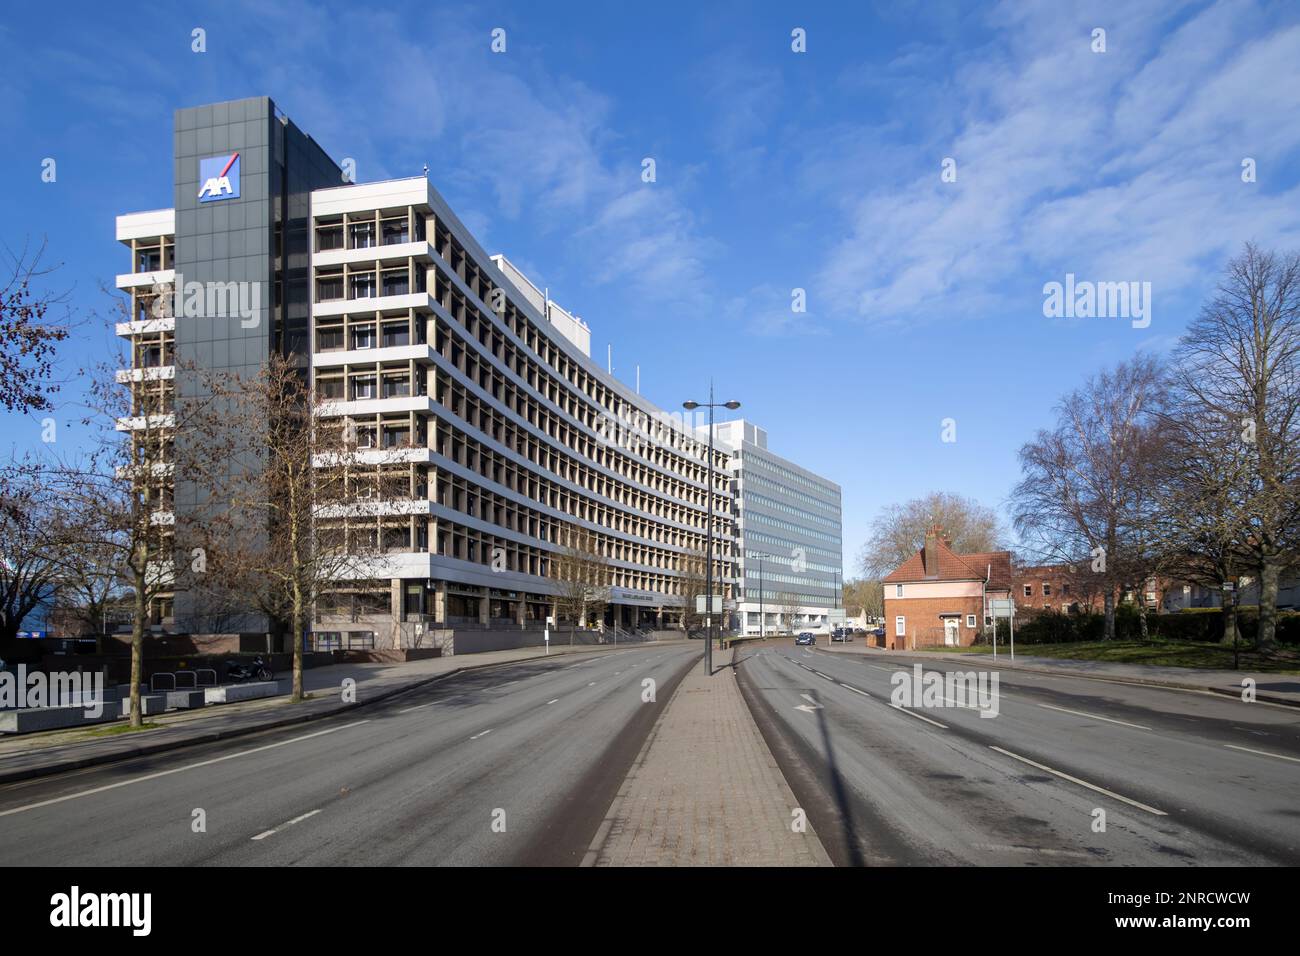 The AXA Insurance offices in the centre of Ipswich, Suffolk, UK Stock Photo